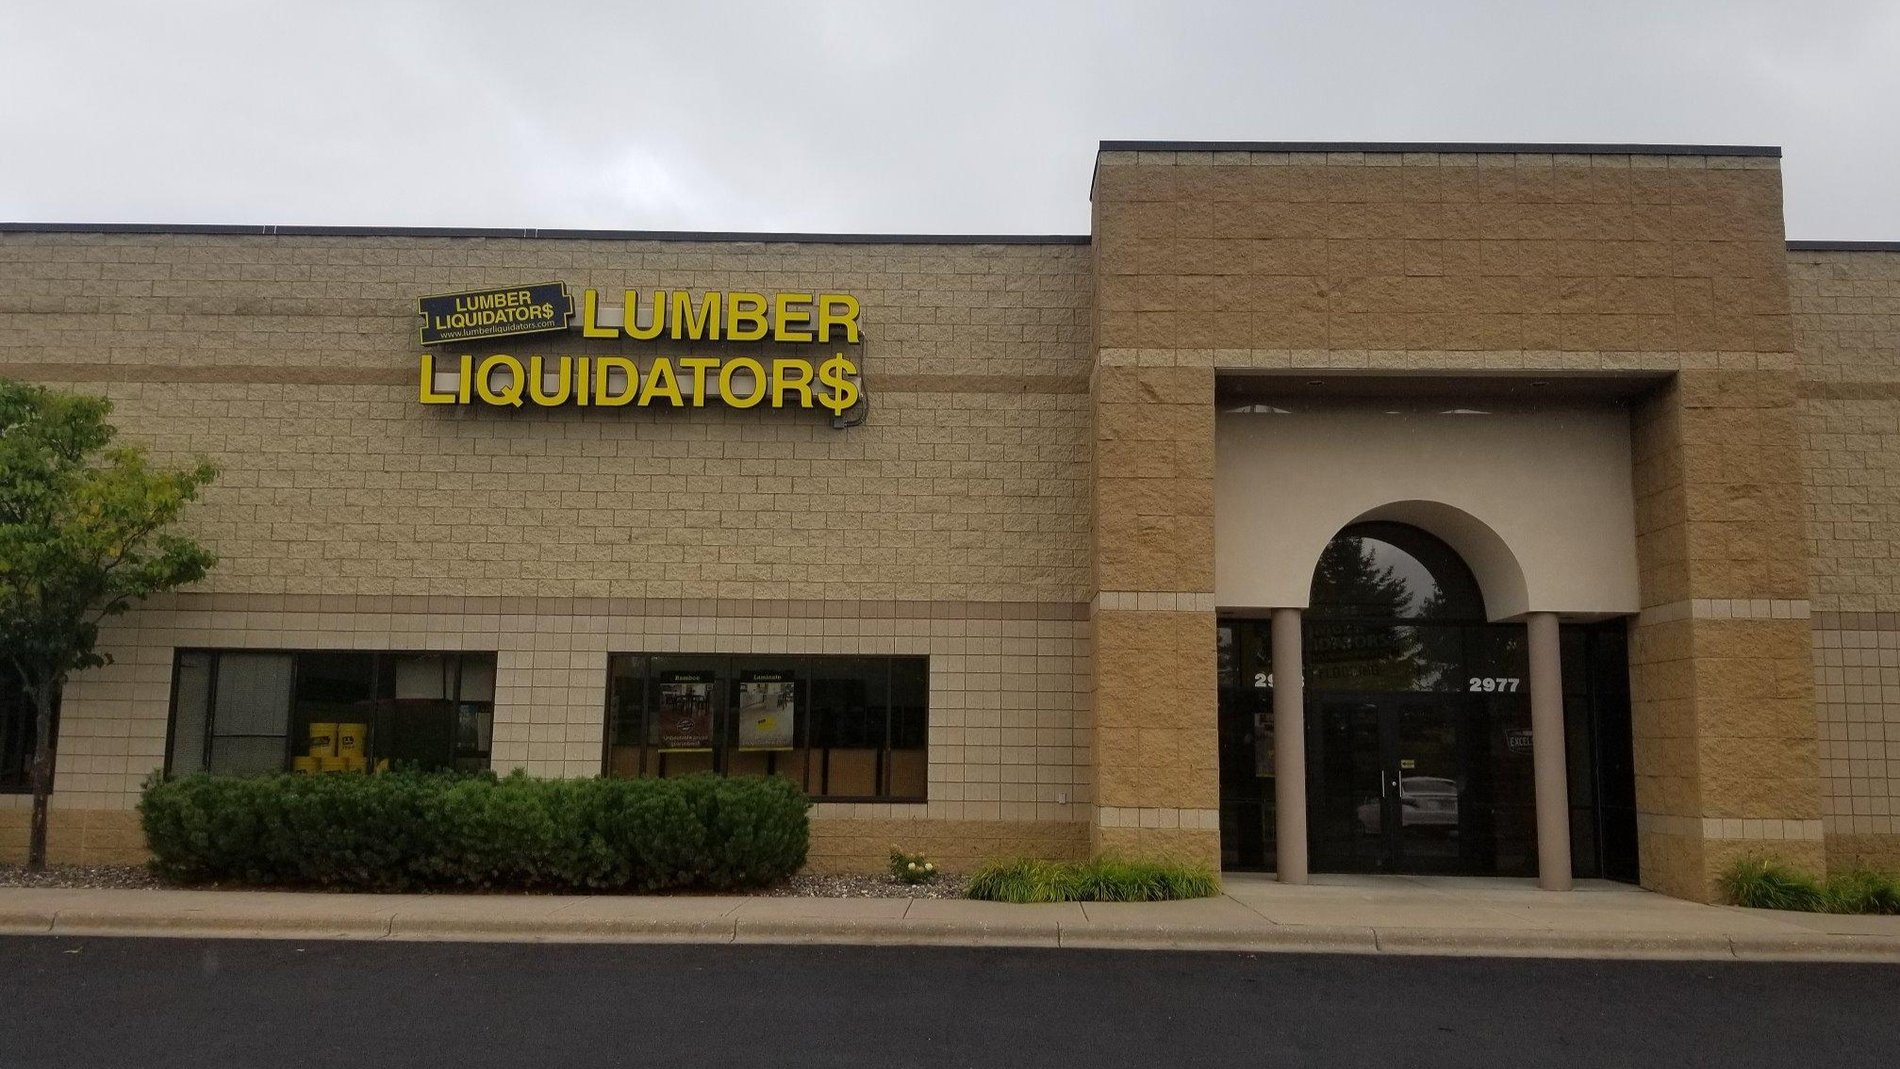 LL Flooring #1089 Chanhassen | 2973 Water Tower Place | Storefront